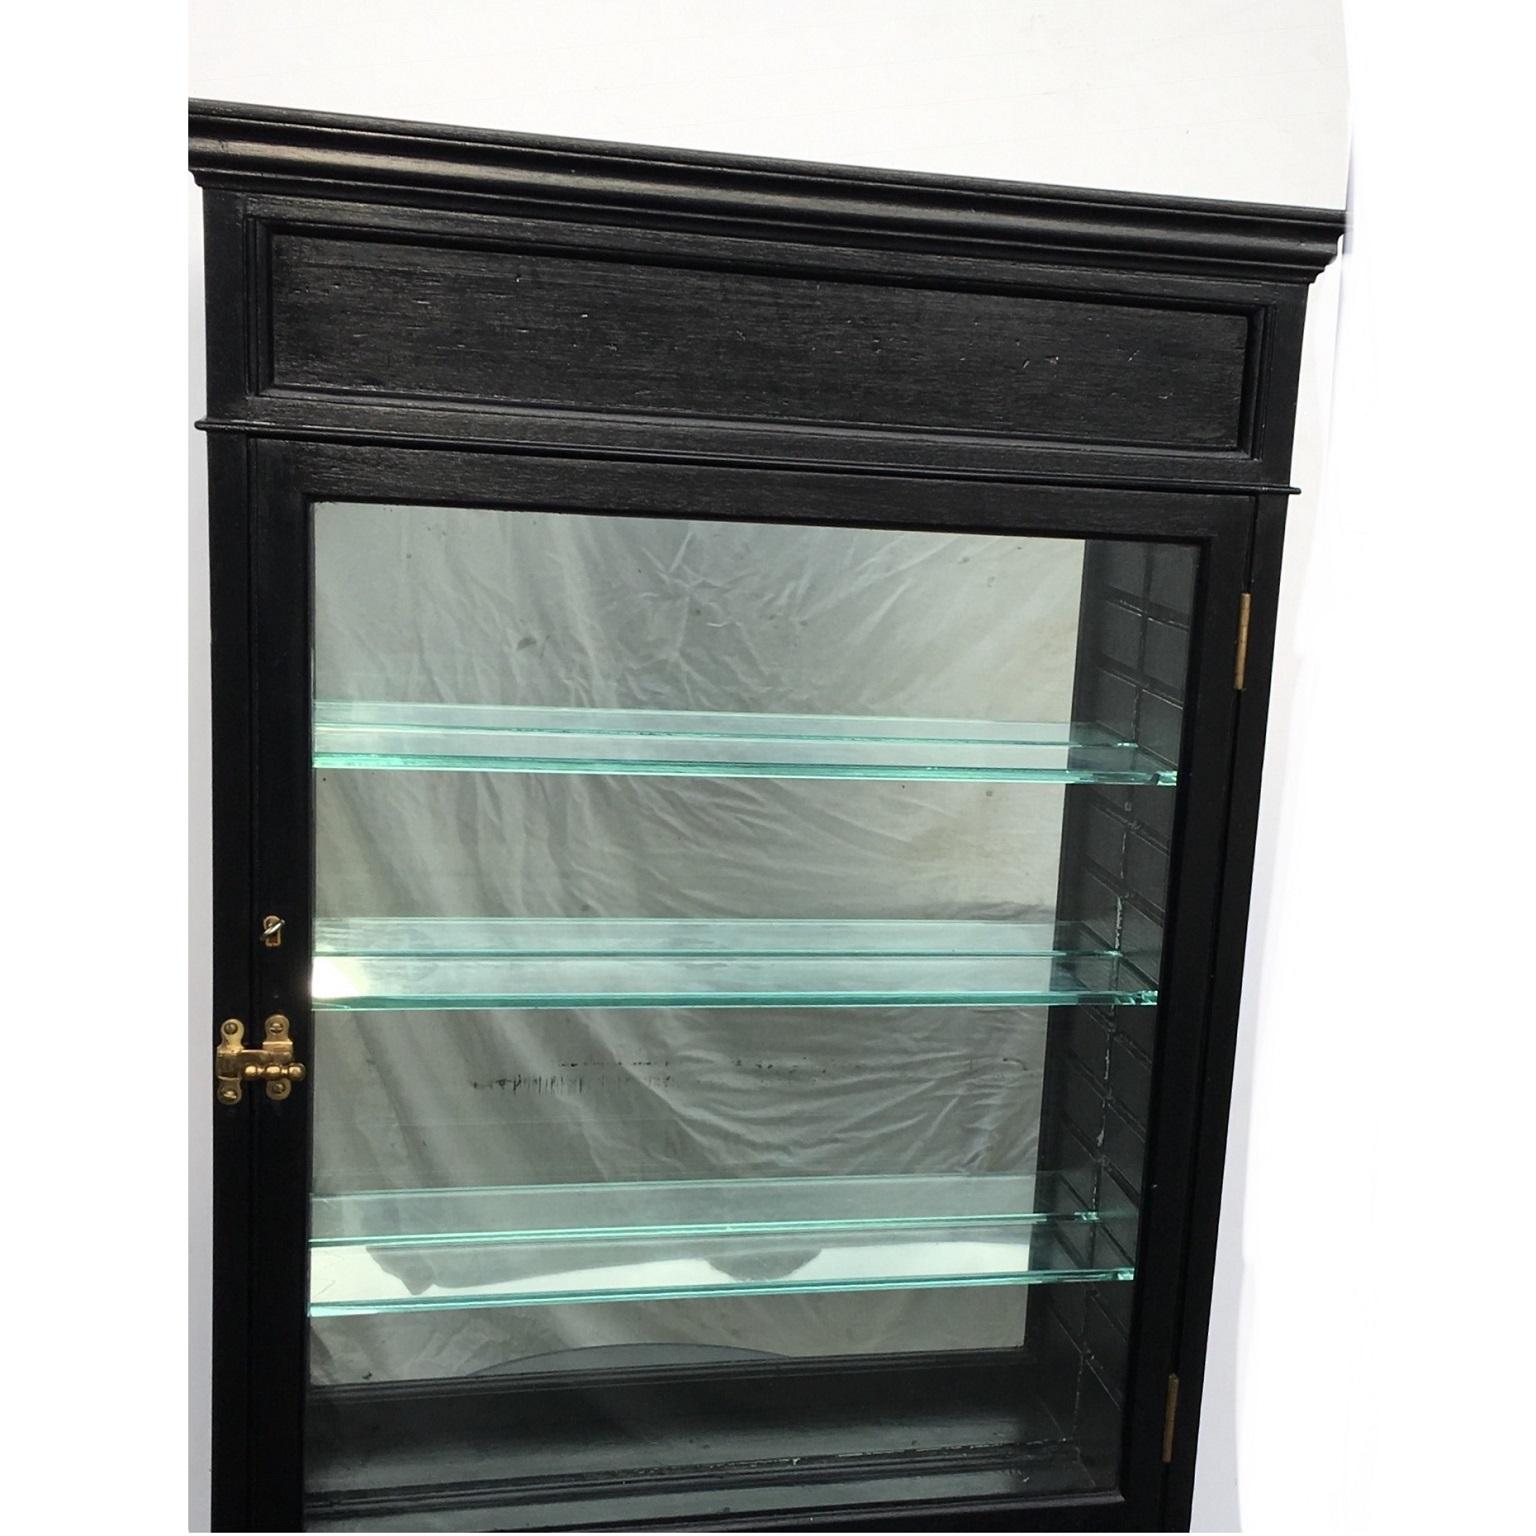 Black wall or freestanding curios display case, English, 1930s.

Painted Black gloss wood and glass wall mounted or free standing curios, display case or Bathroom cabinet. This would once have been a shop display case.
Constructed with aged